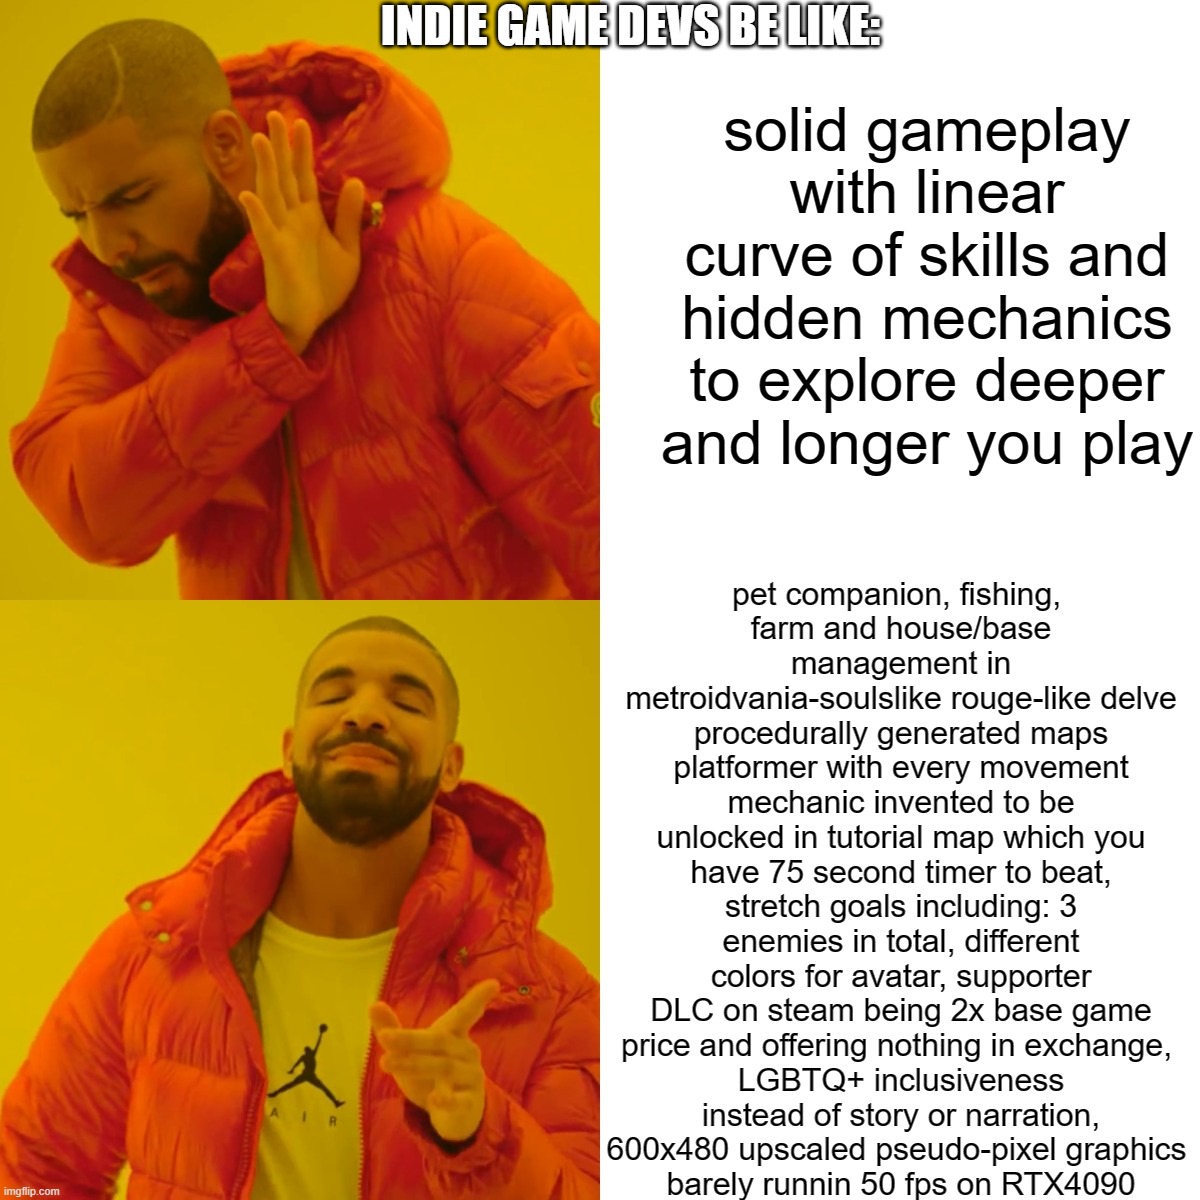 modern indie game devs | INDIE GAME DEVS BE LIKE:; solid gameplay with linear curve of skills and hidden mechanics to explore deeper and longer you play; pet companion, fishing, 
farm and house/base management in metroidvania-soulslike rouge-like delve procedurally generated maps platformer with every movement mechanic invented to be unlocked in tutorial map which you have 75 second timer to beat, stretch goals including: 3 enemies in total, different colors for avatar, supporter DLC on steam being 2x base game price and offering nothing in exchange, 
LGBTQ+ inclusiveness instead of story or narration,
600x480 upscaled pseudo-pixel graphics 
barely runnin 50 fps on RTX4090 | image tagged in memes,drake hotline bling | made w/ Imgflip meme maker